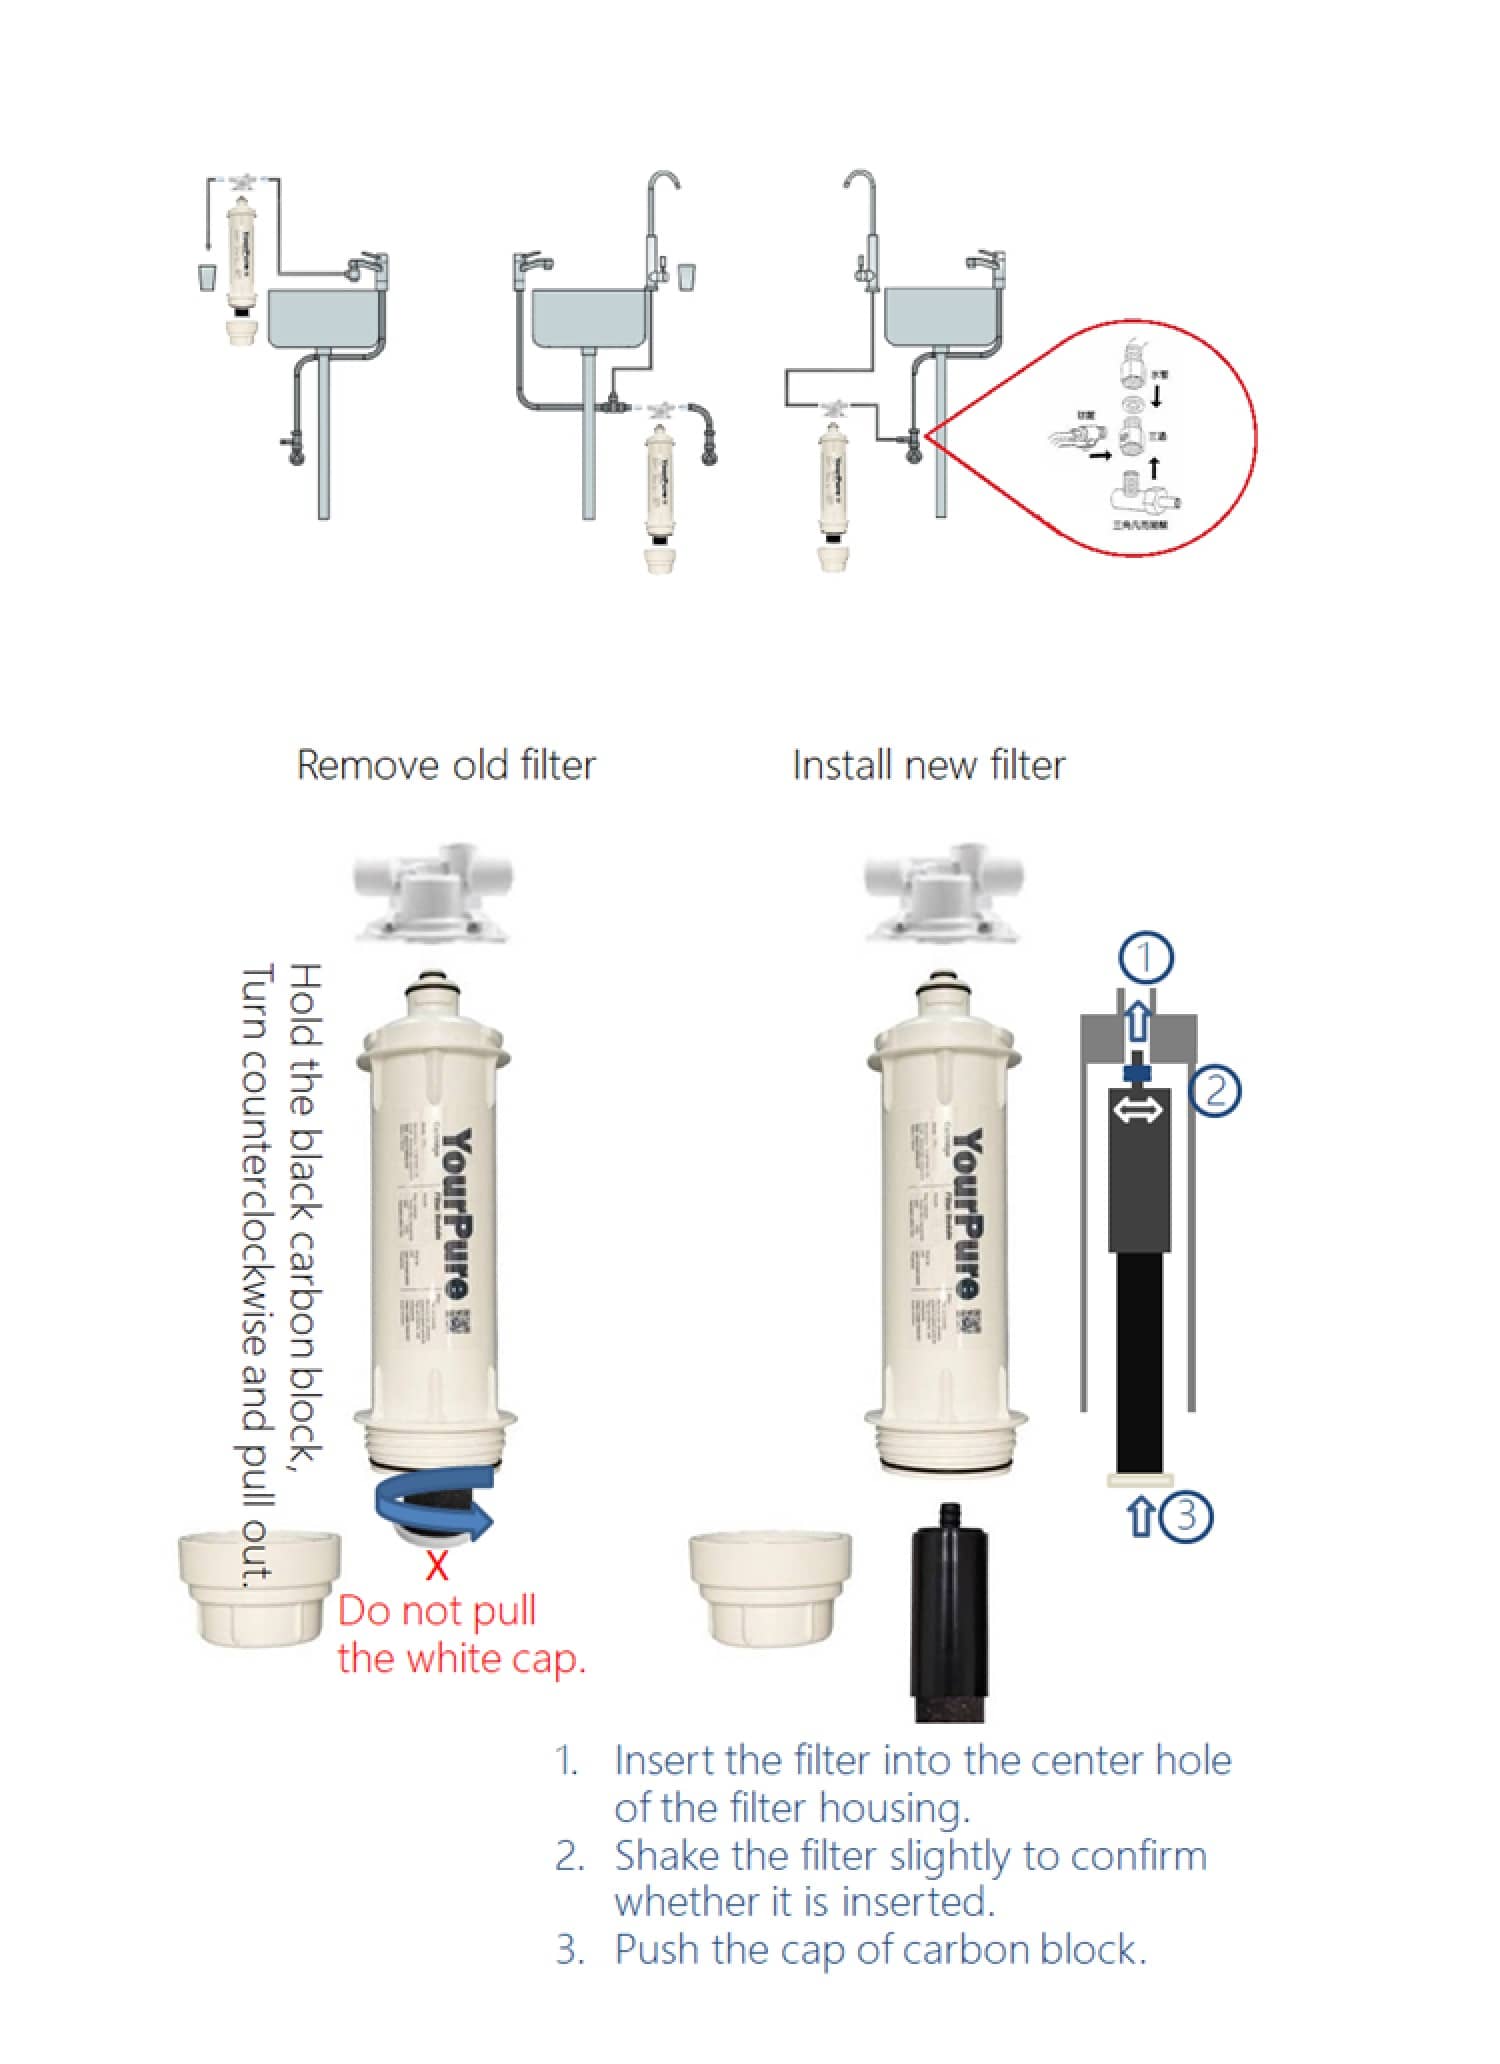 The quick-release filter can be installed above or below the sink or used as a refrigerator filter.